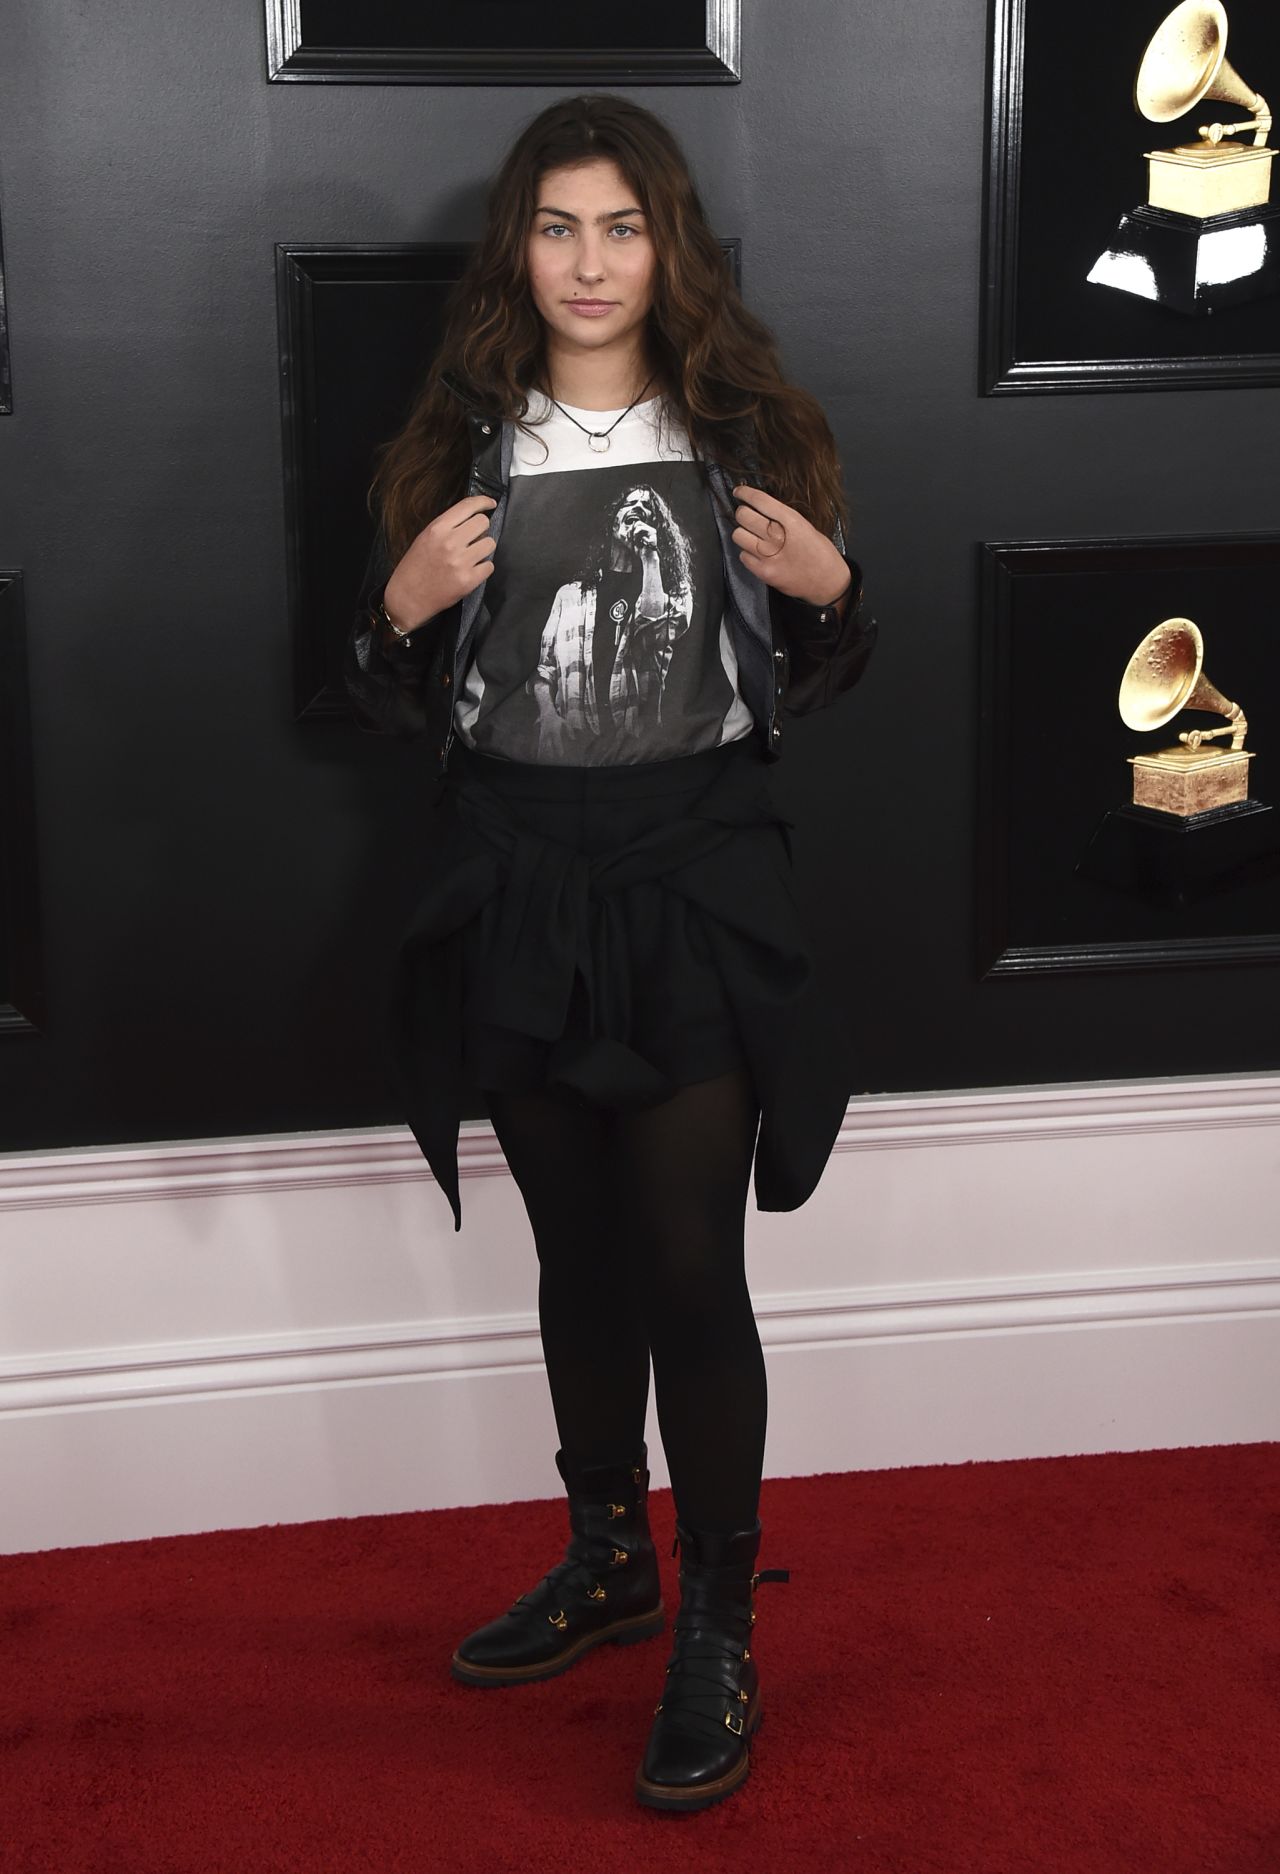 Toni Cornell wears a shirt showing her father, the late rocker Chris Cornell